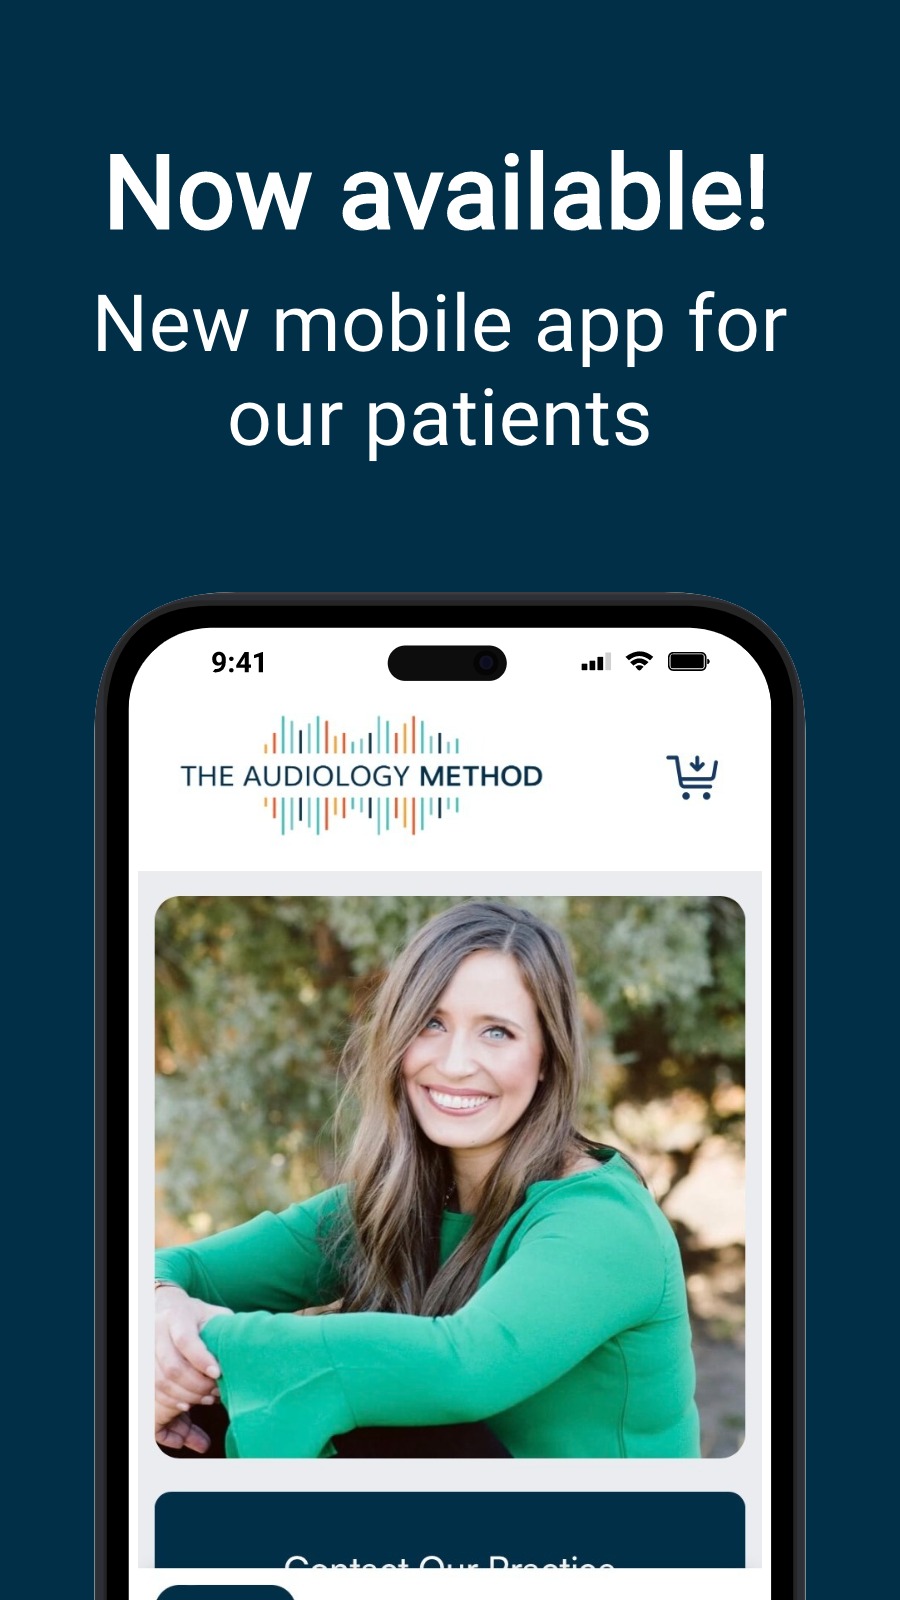 Now available! - New mobile app for our patients